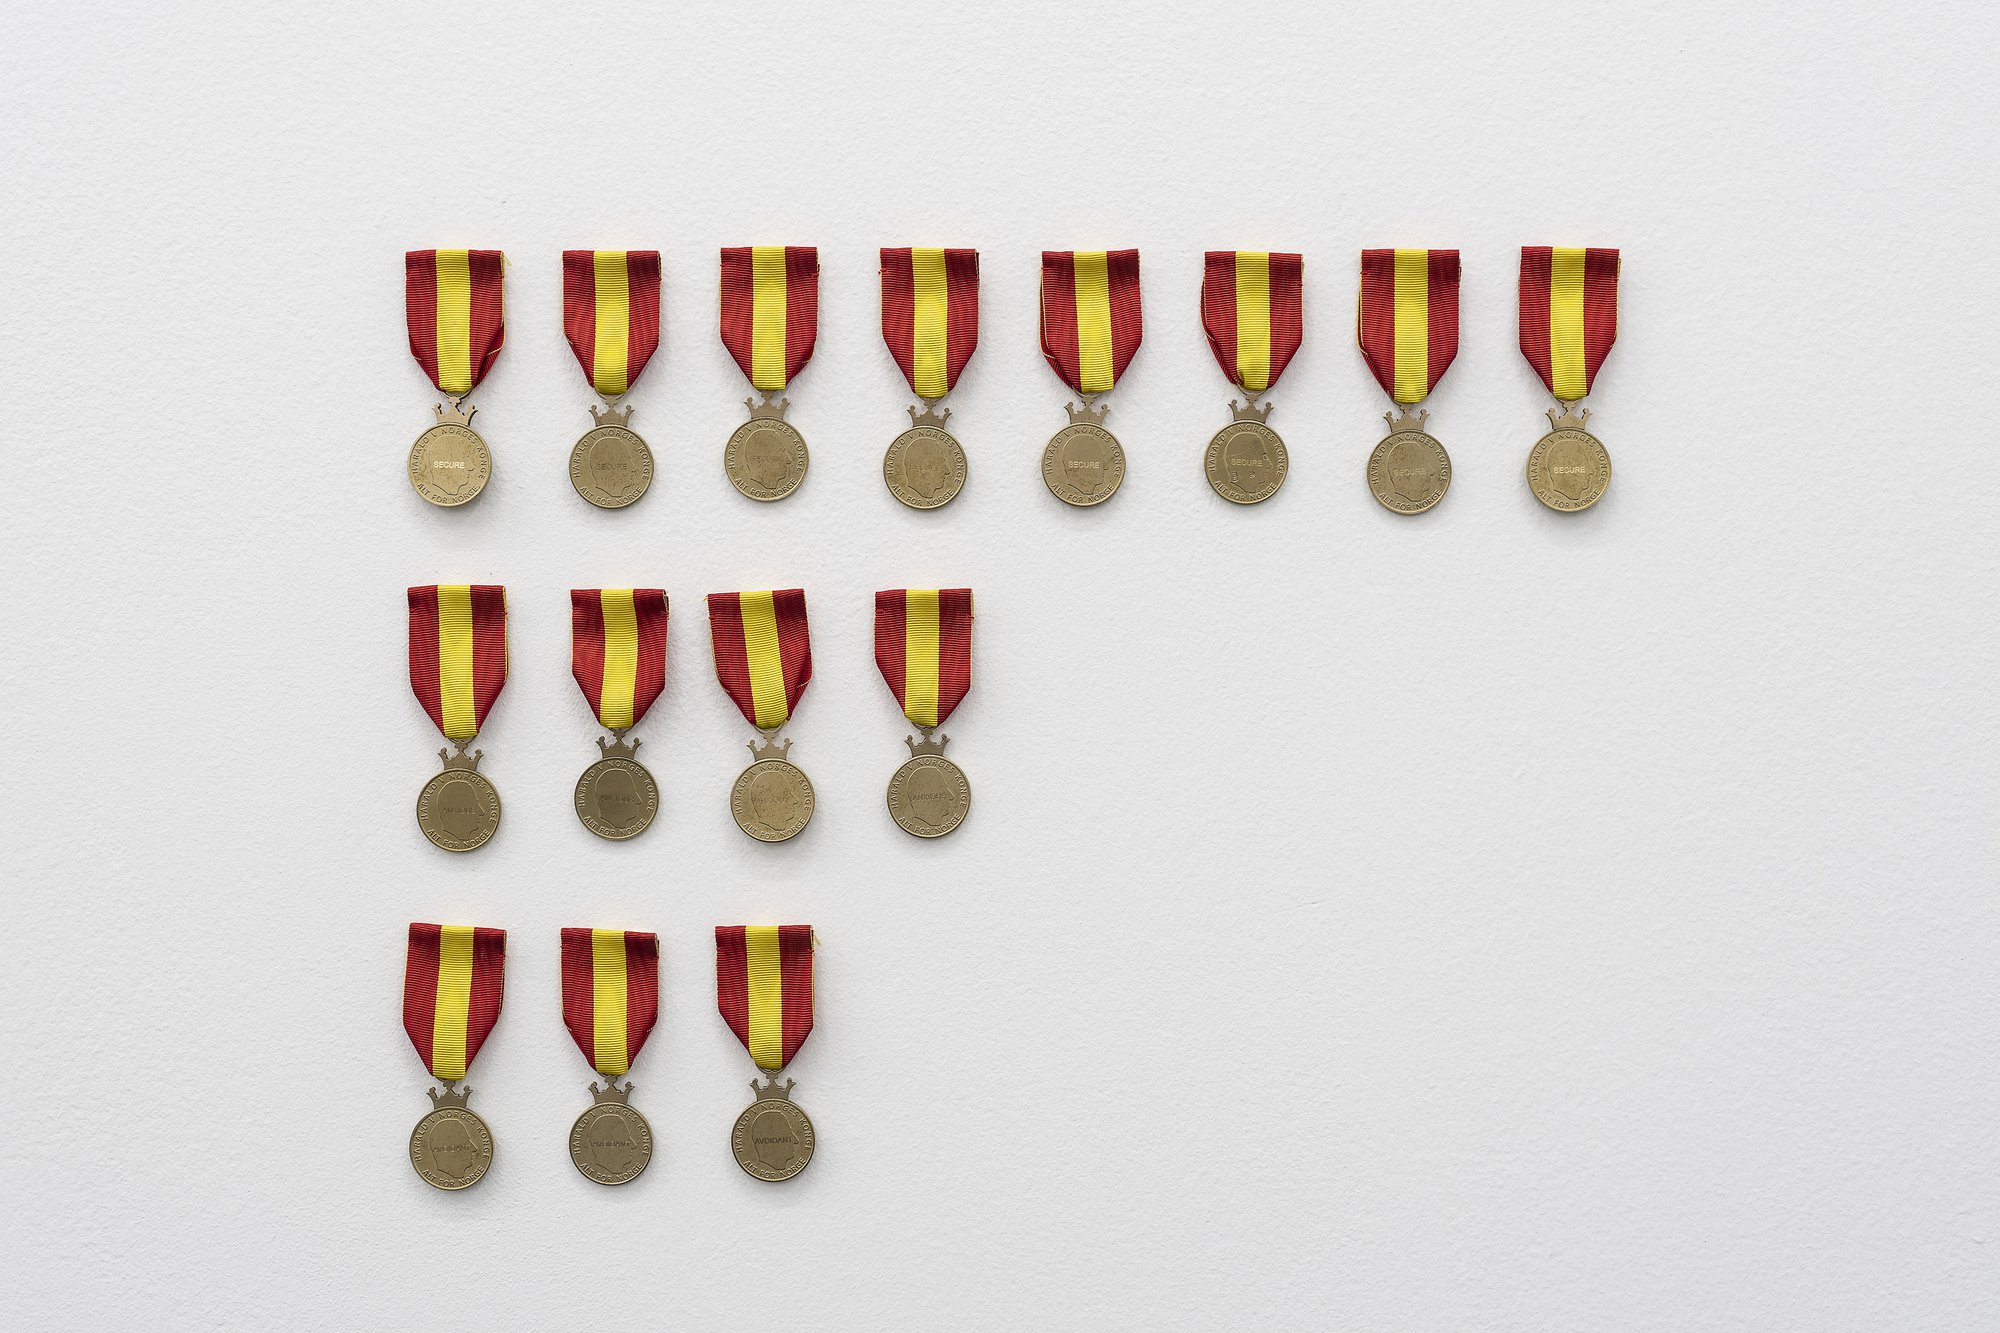 Sidsel Meineche Hansen, SECURE (Bergen Kunsthall), 15 medals of merit, stamped in nordic gold with engraving, 2021